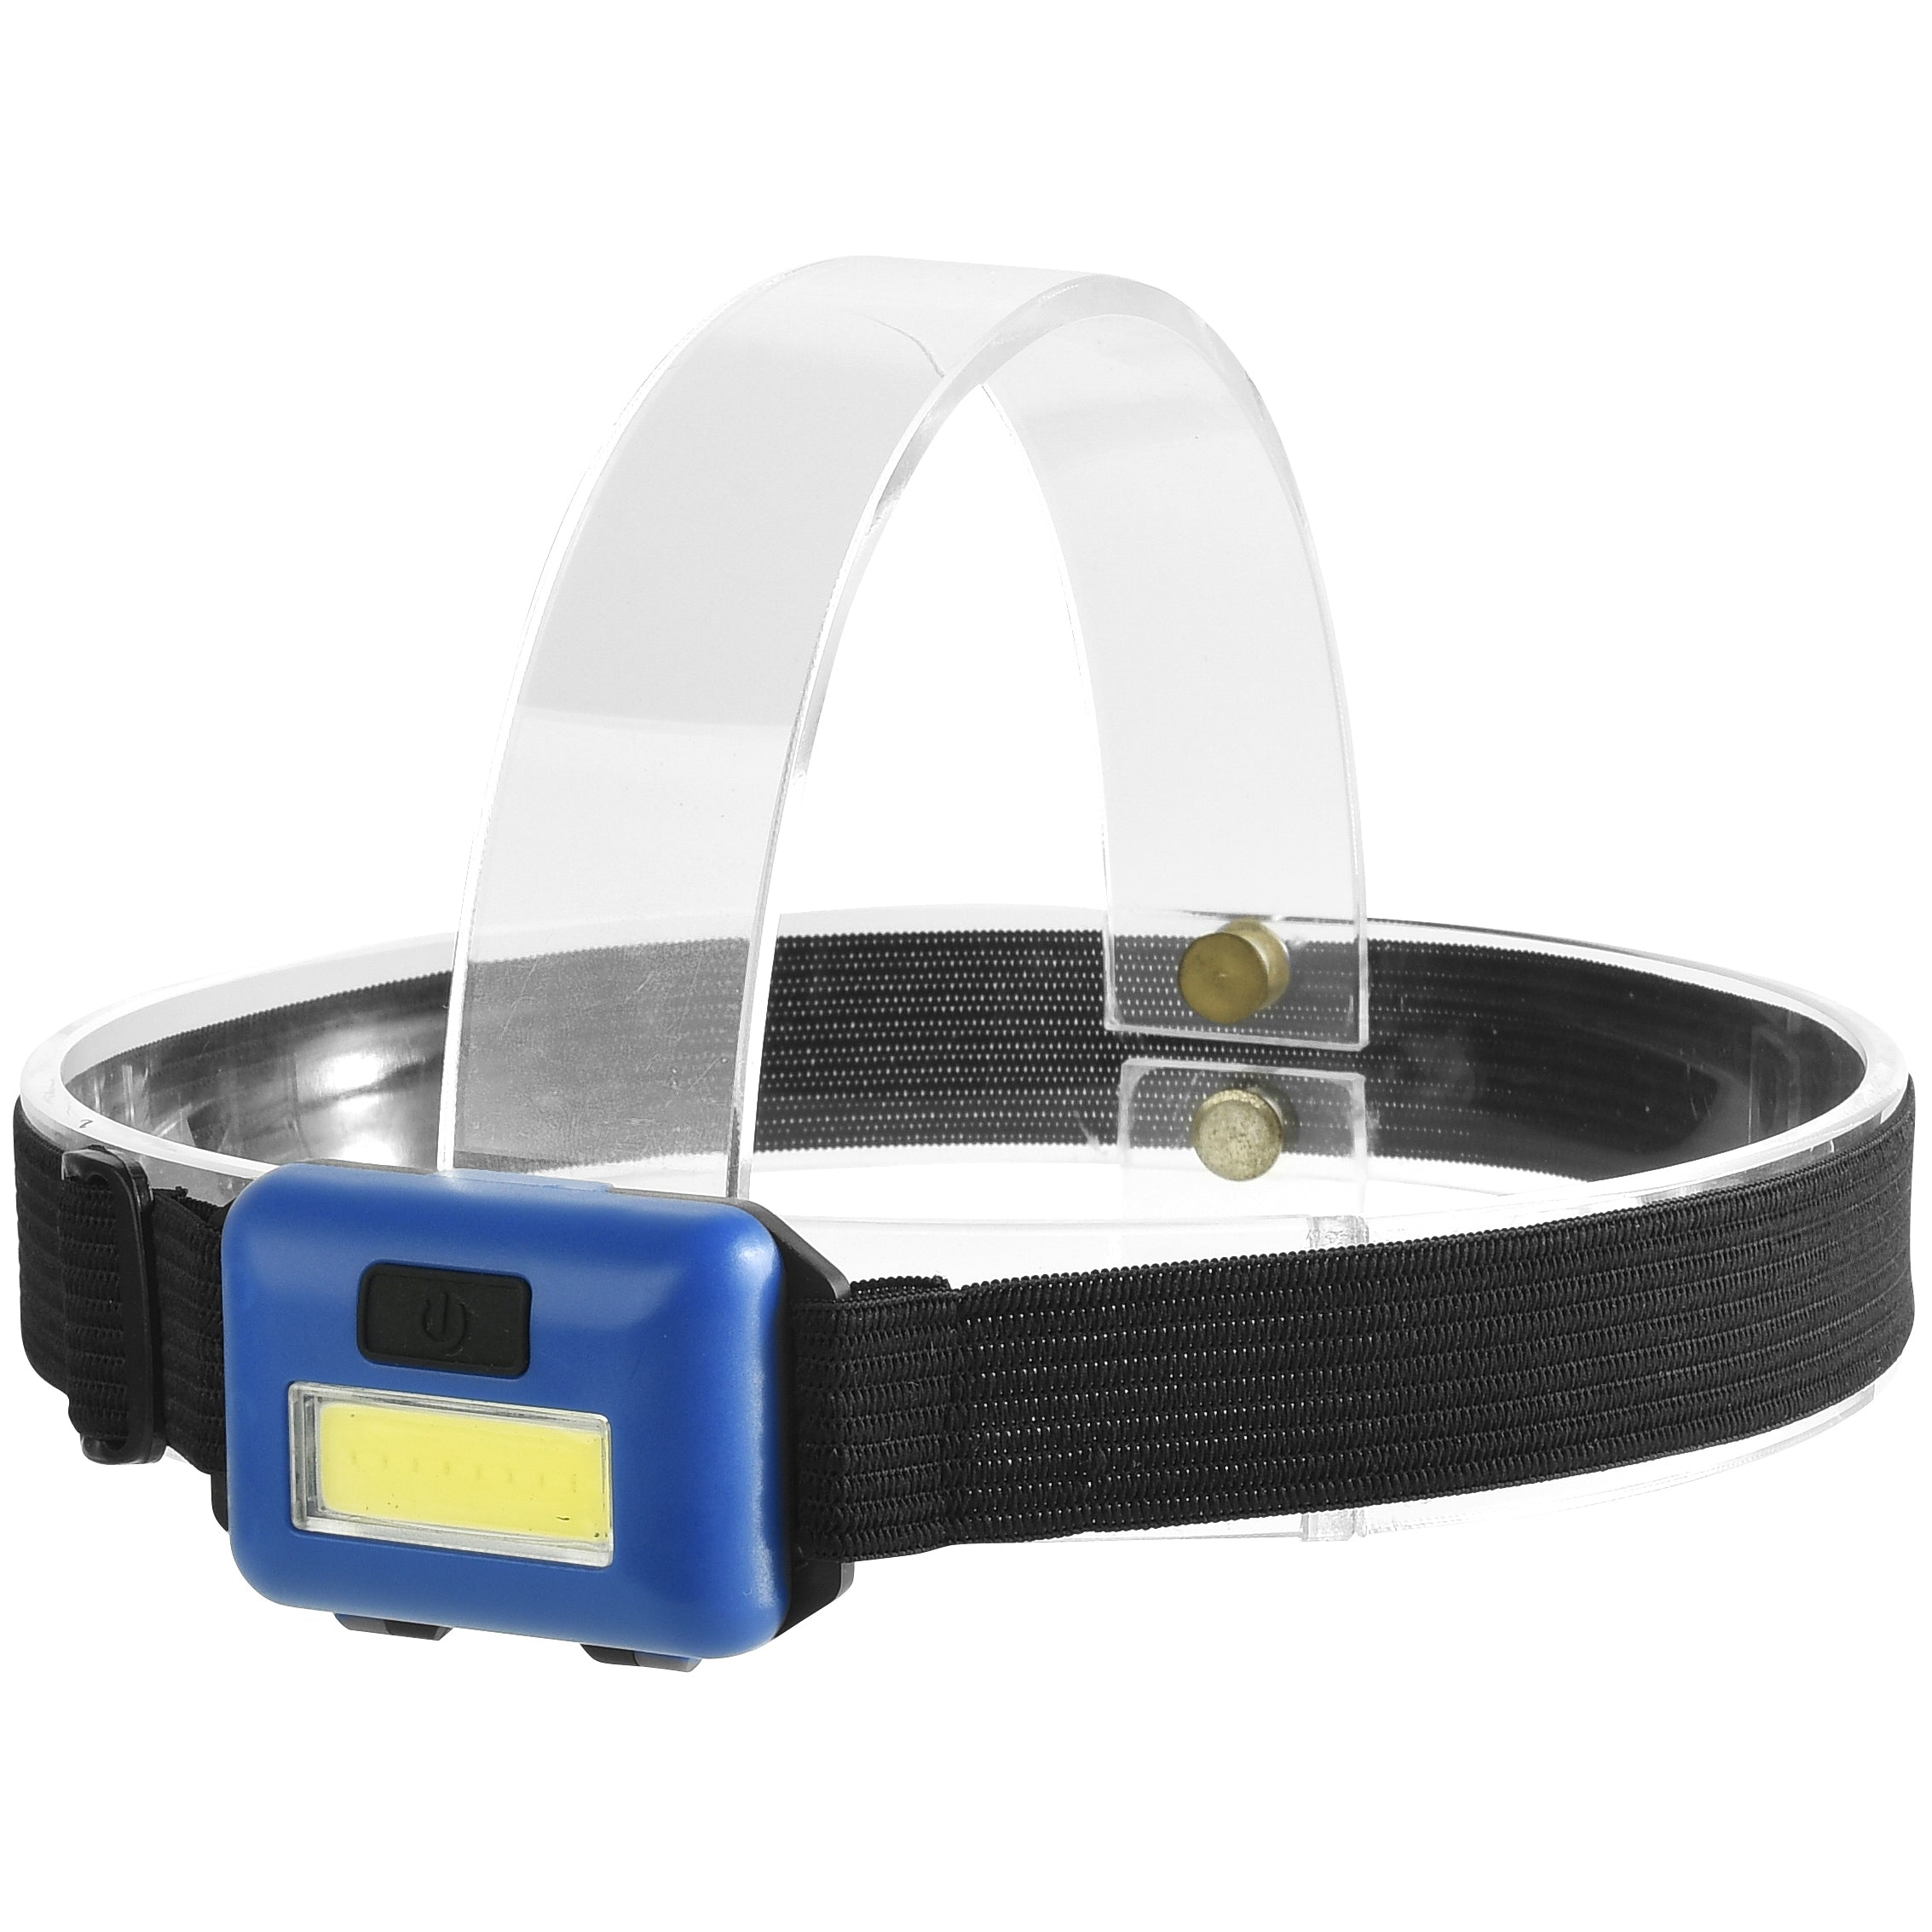 XANES 201 450LM COB LED Ultralight Headlamp 3 Switch Modes Adjustable Camping Running 3*AAAA Battery